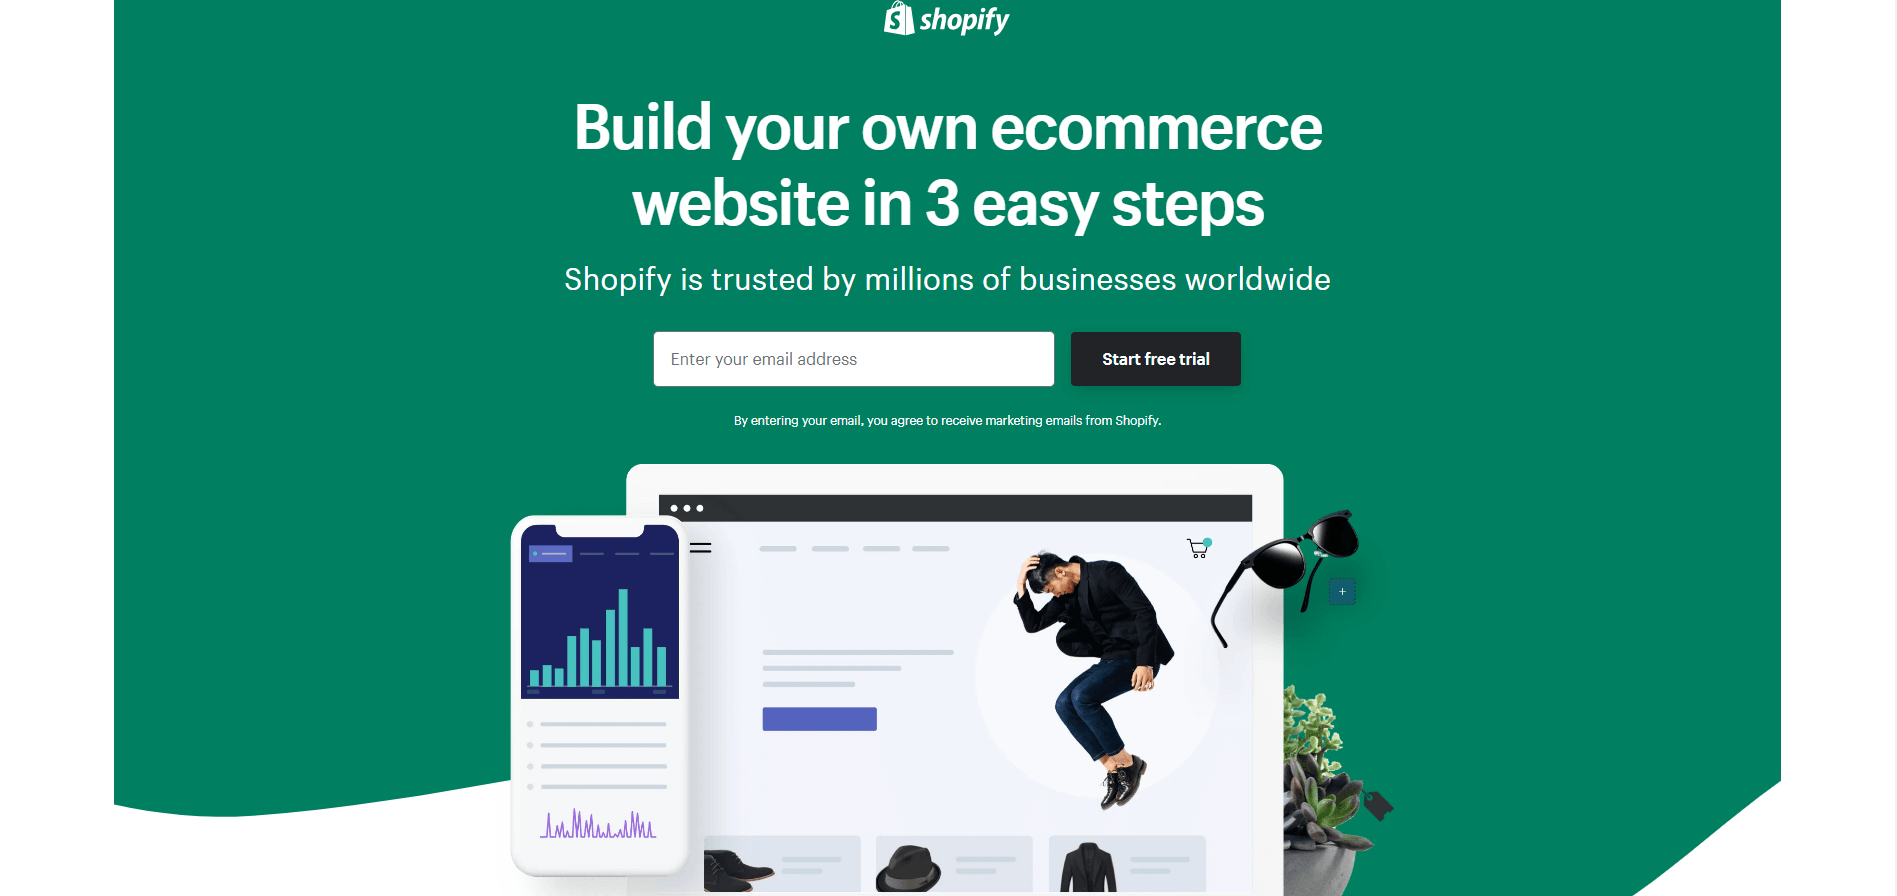 Shopify platform proficiency is one of the most important Shopify developer skills